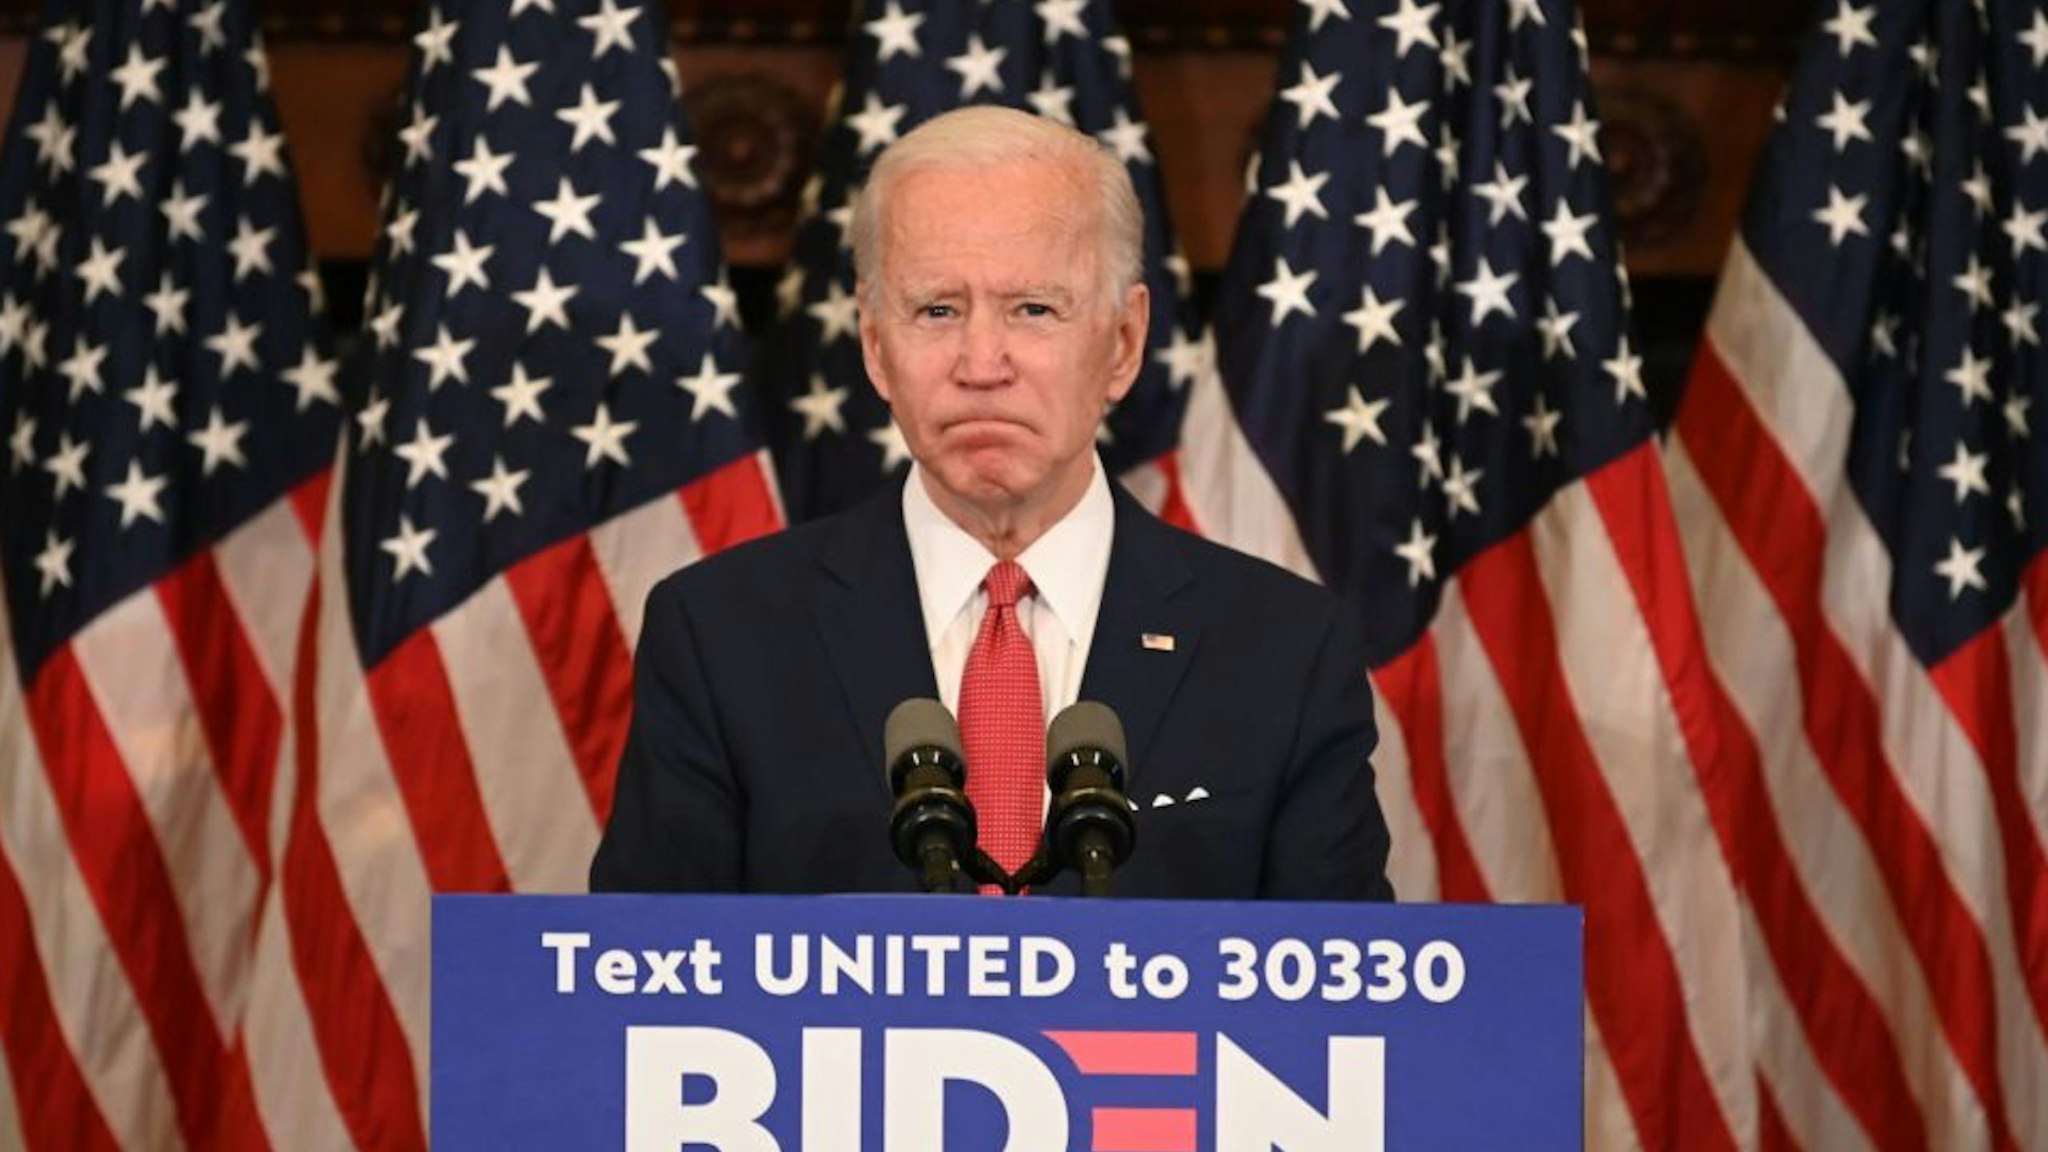 Democratic presidential candidate, and former Vice President Joe Biden speaks about the unrest across the country from Philadelphia City Hall on June 2, 2020 in Philadelphia, Pennsylvania, contrasting his leadership style with that of US President Donald Trump, and calling George Floyds death a wake-up call for our nation.